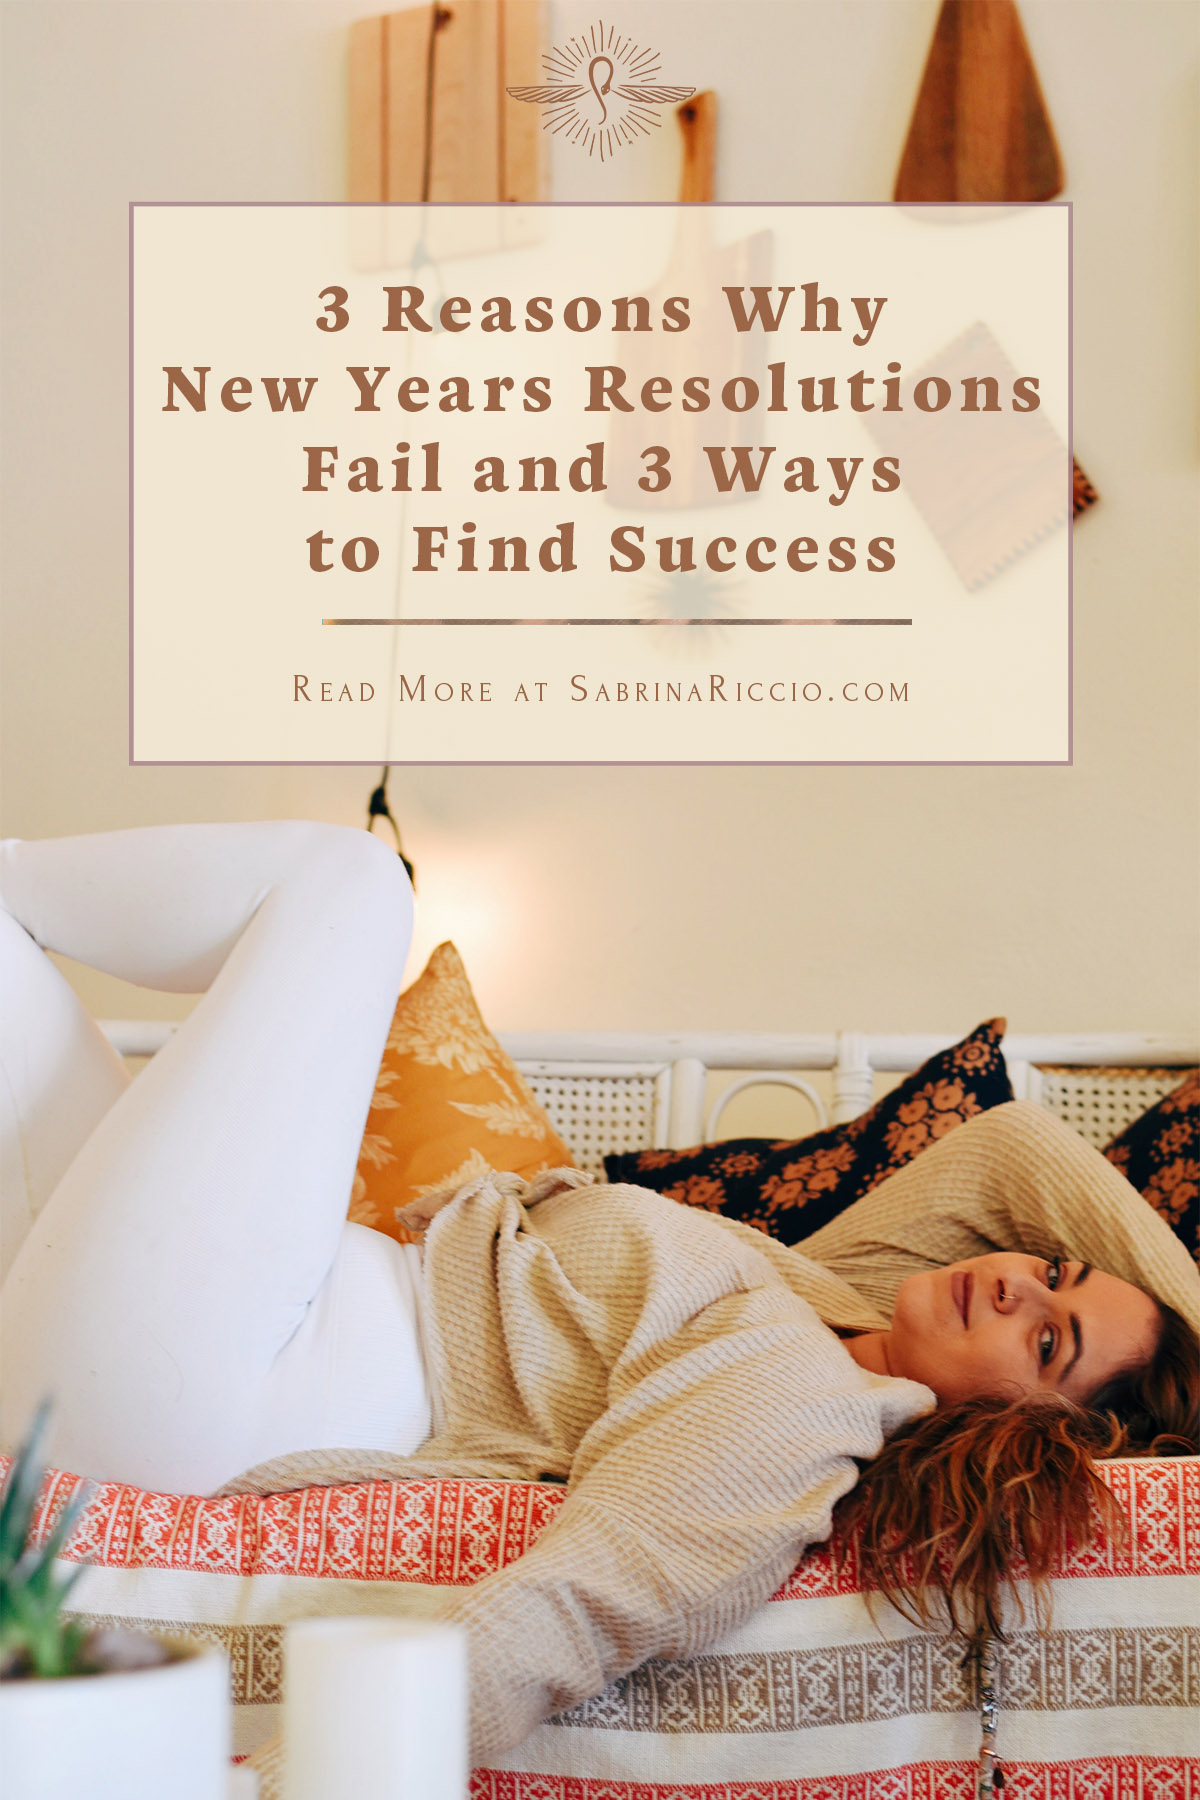 Studies show 80% of New Years Resolutions FAIL by February. Here are some tips and truths about understanding the energy of the new year and how you can work with it because instead of being a victim to the New Years Resolution pressures, you choose to be victorious. Discover More at sabrinariccio.com